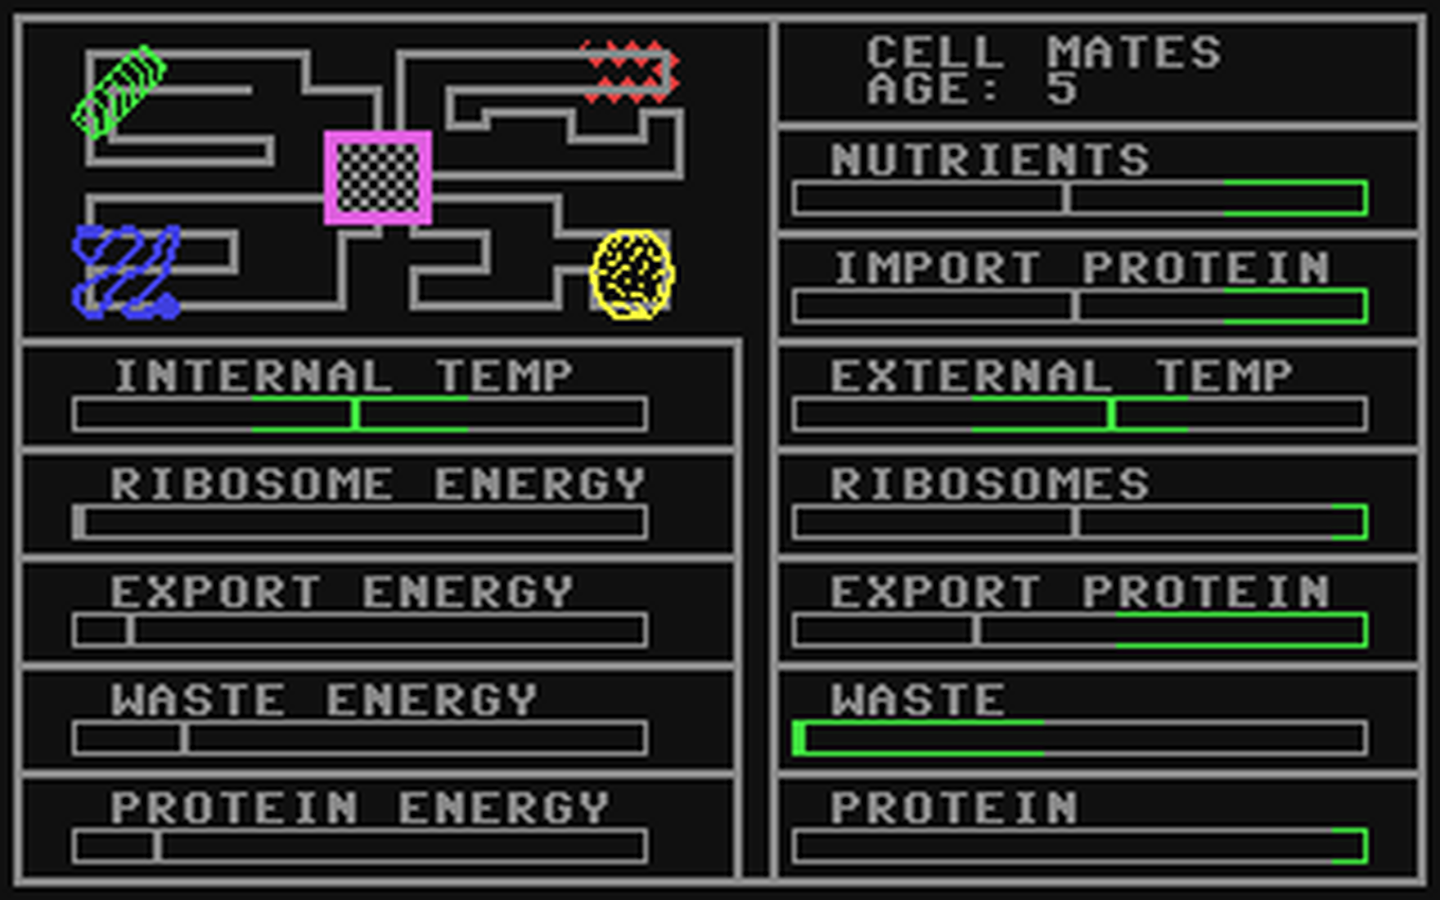 C64 GameBase Cell_Mates Emerald_Valley_Publishing_Co./Home_Computer_Magazine 1985